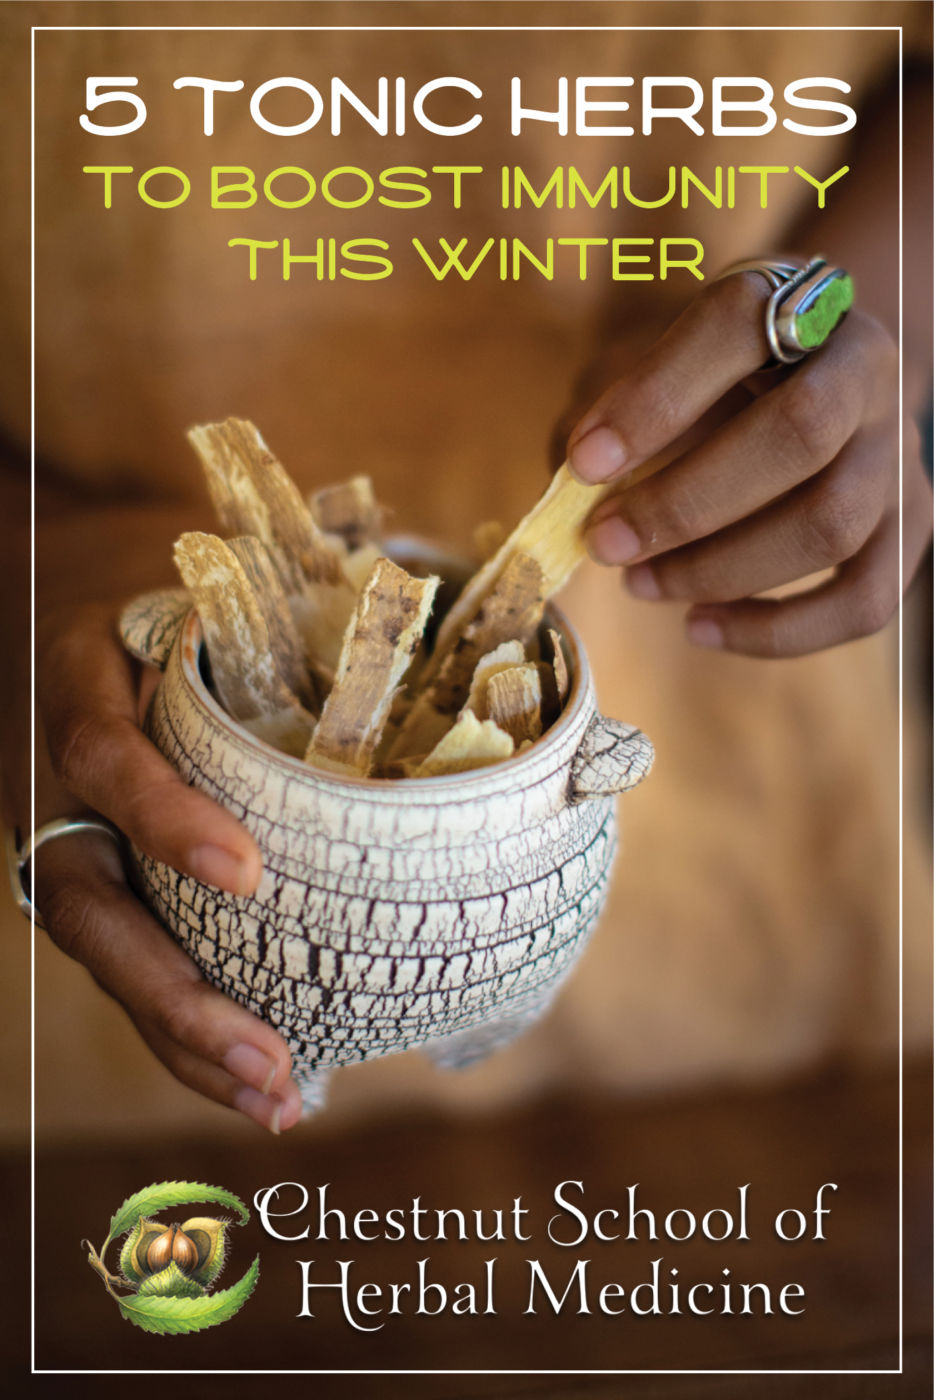 5 Tonic Herbs to Boost Immunity this Winter